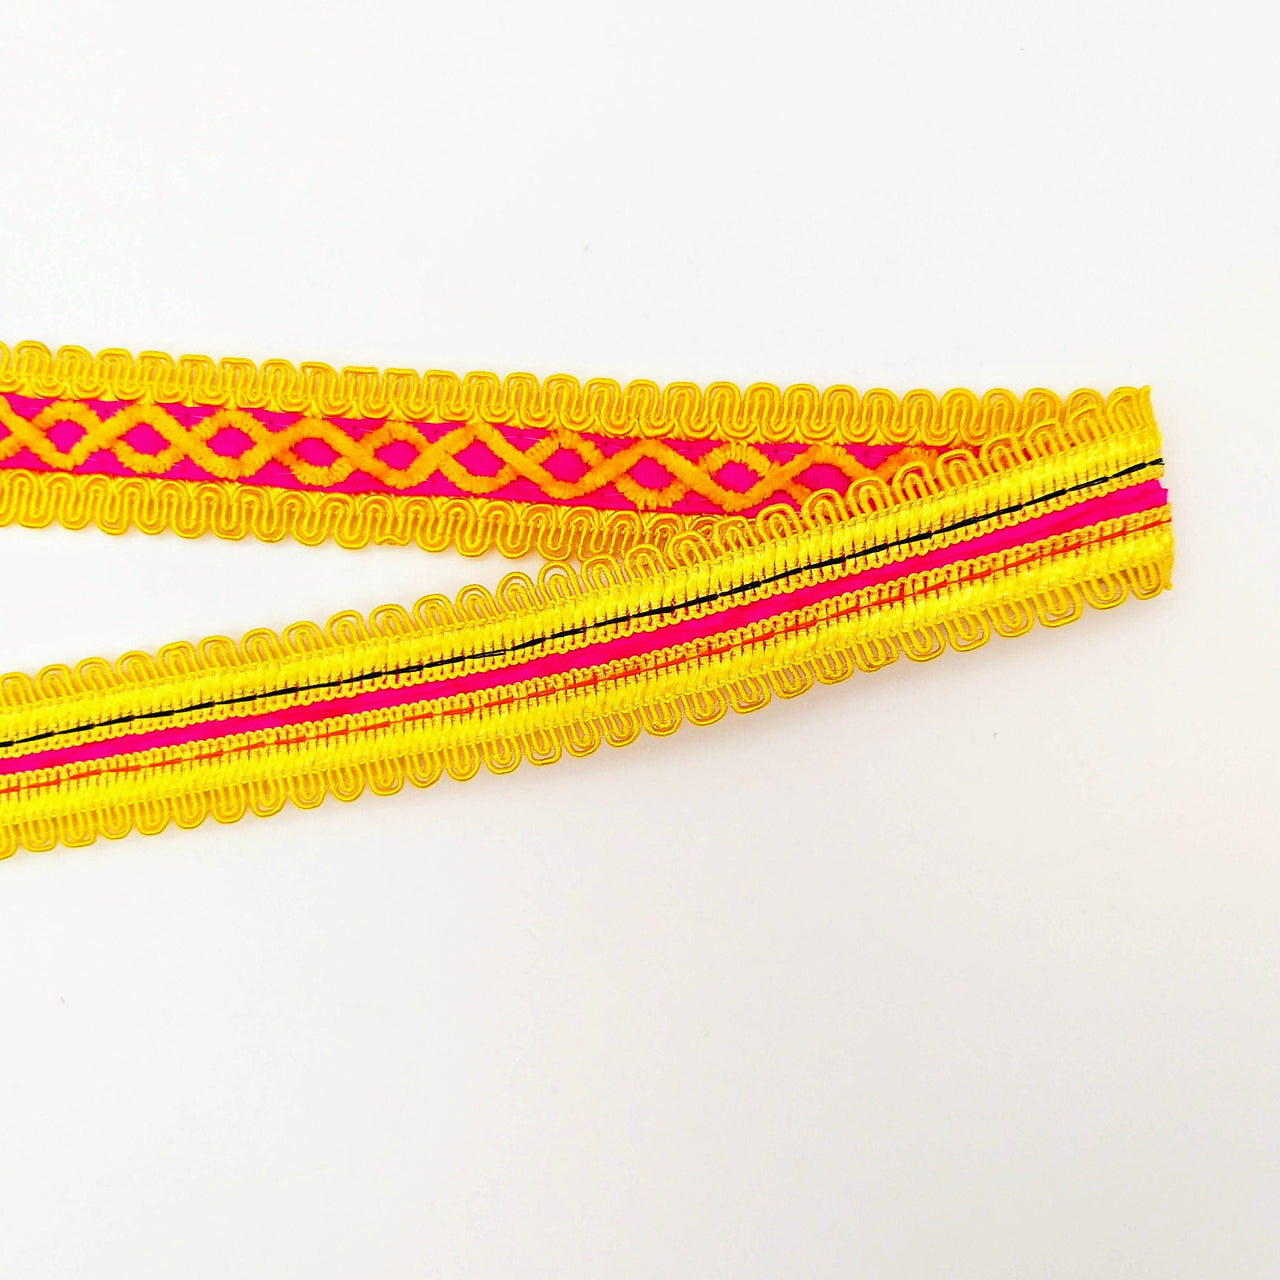 Orange Cotton Fabric Lace Trim with Yellow Thread Embroidery, Trim By 3 Yards, Craft Decorative Ribbon